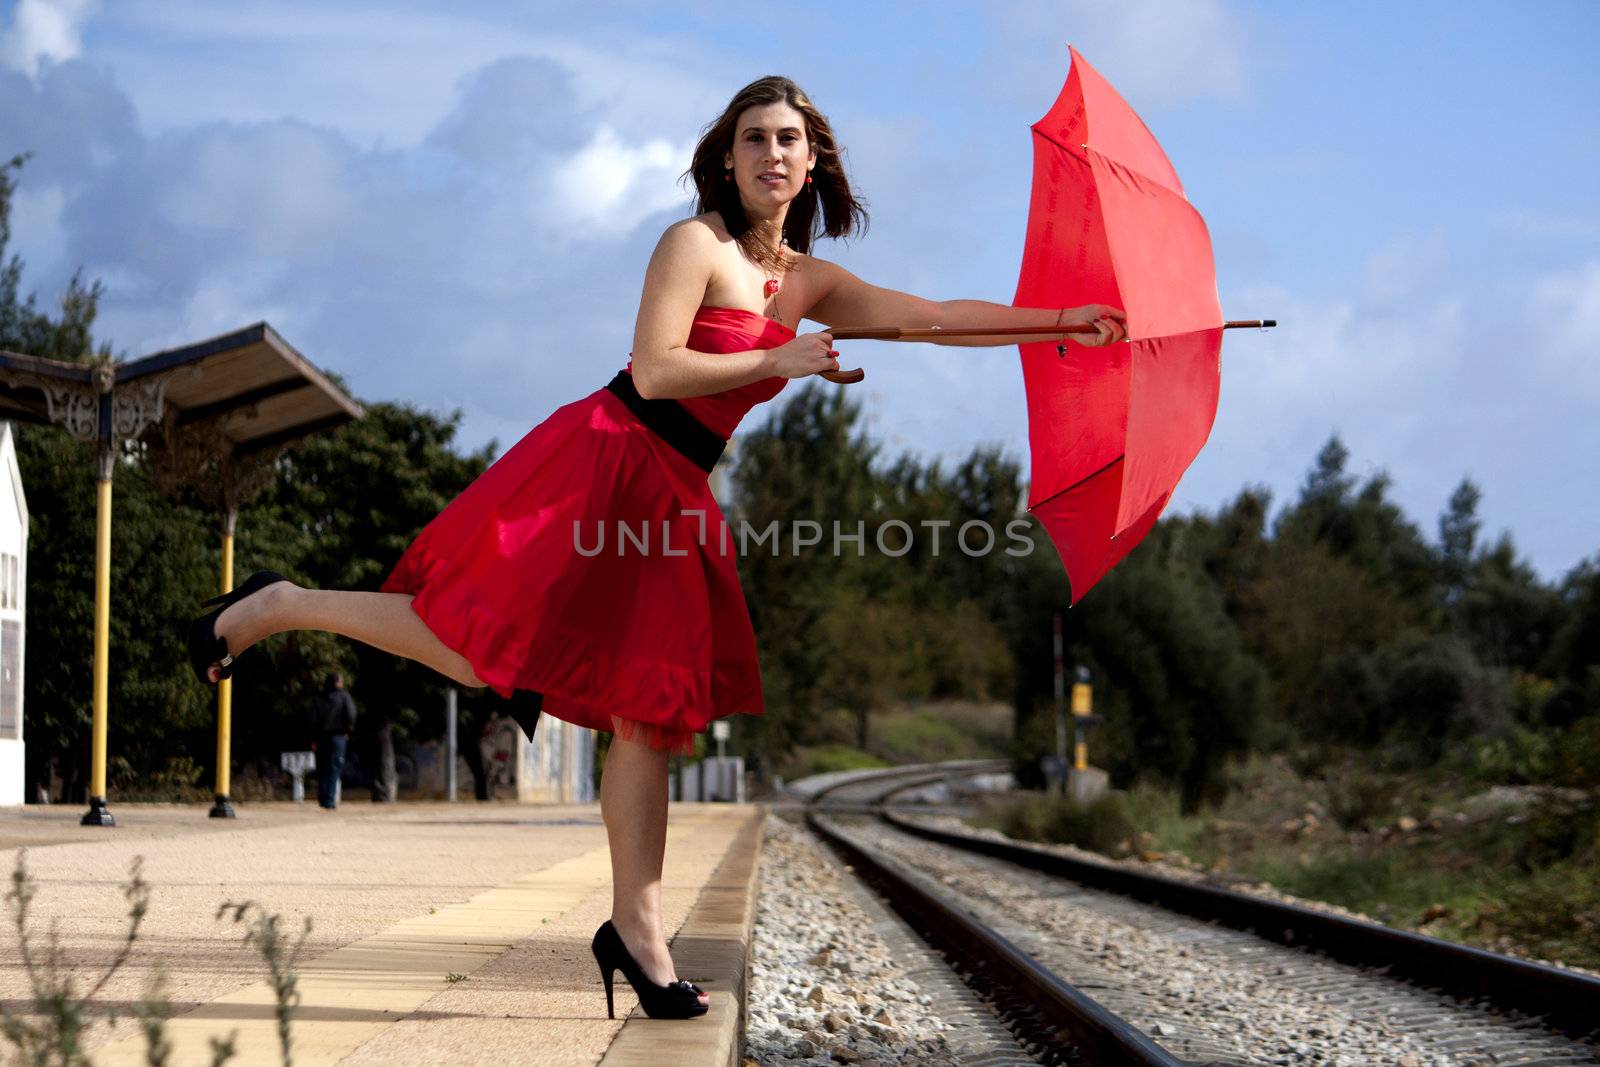 View of a beautiful woman with red dress and umbrella